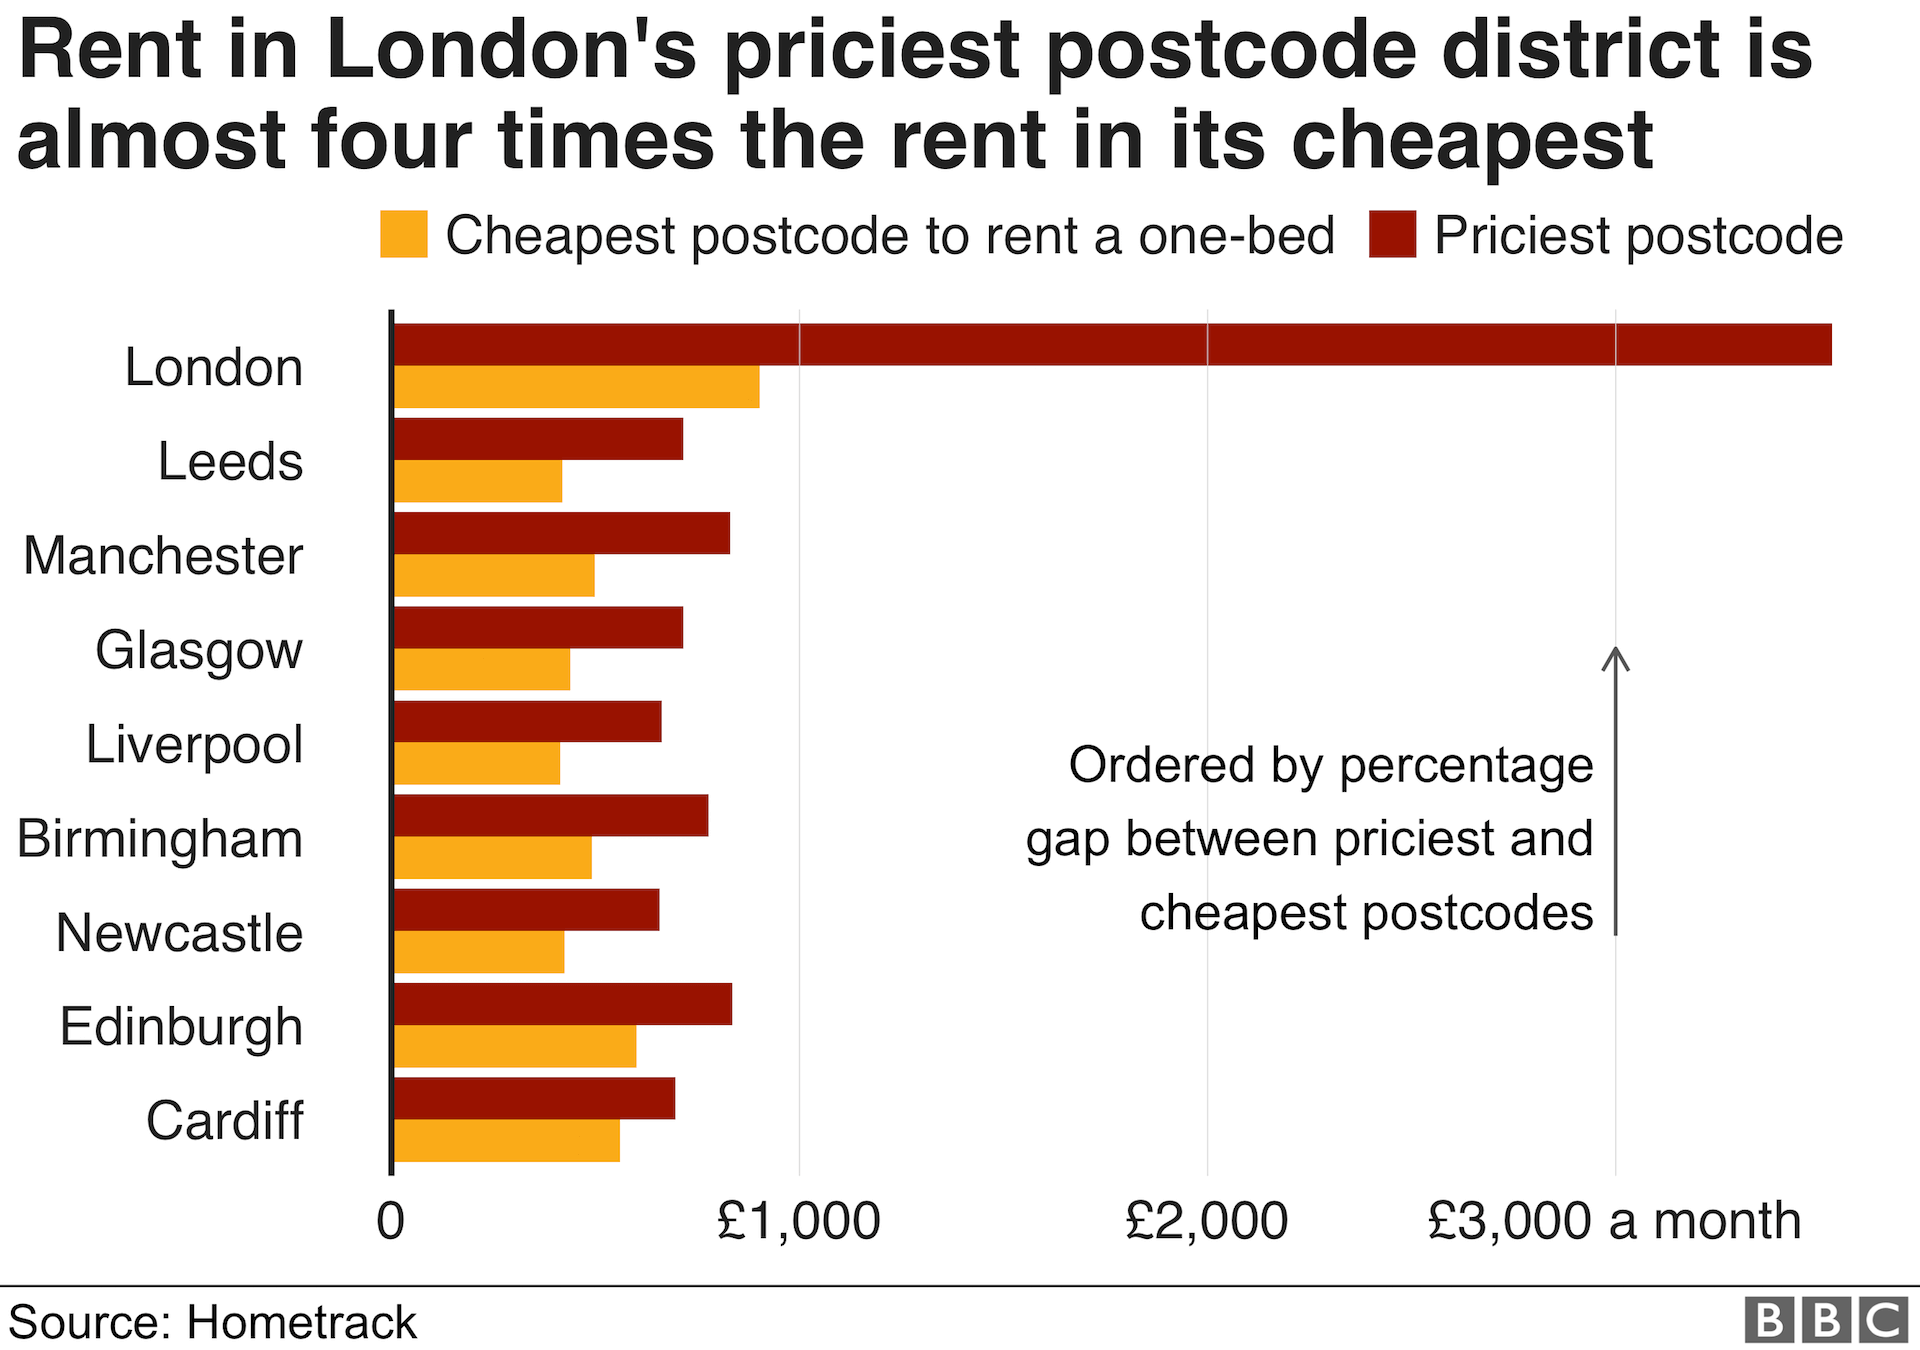 Chart showing rent in Londons priciest postcodes versus the cheapest postcodes.